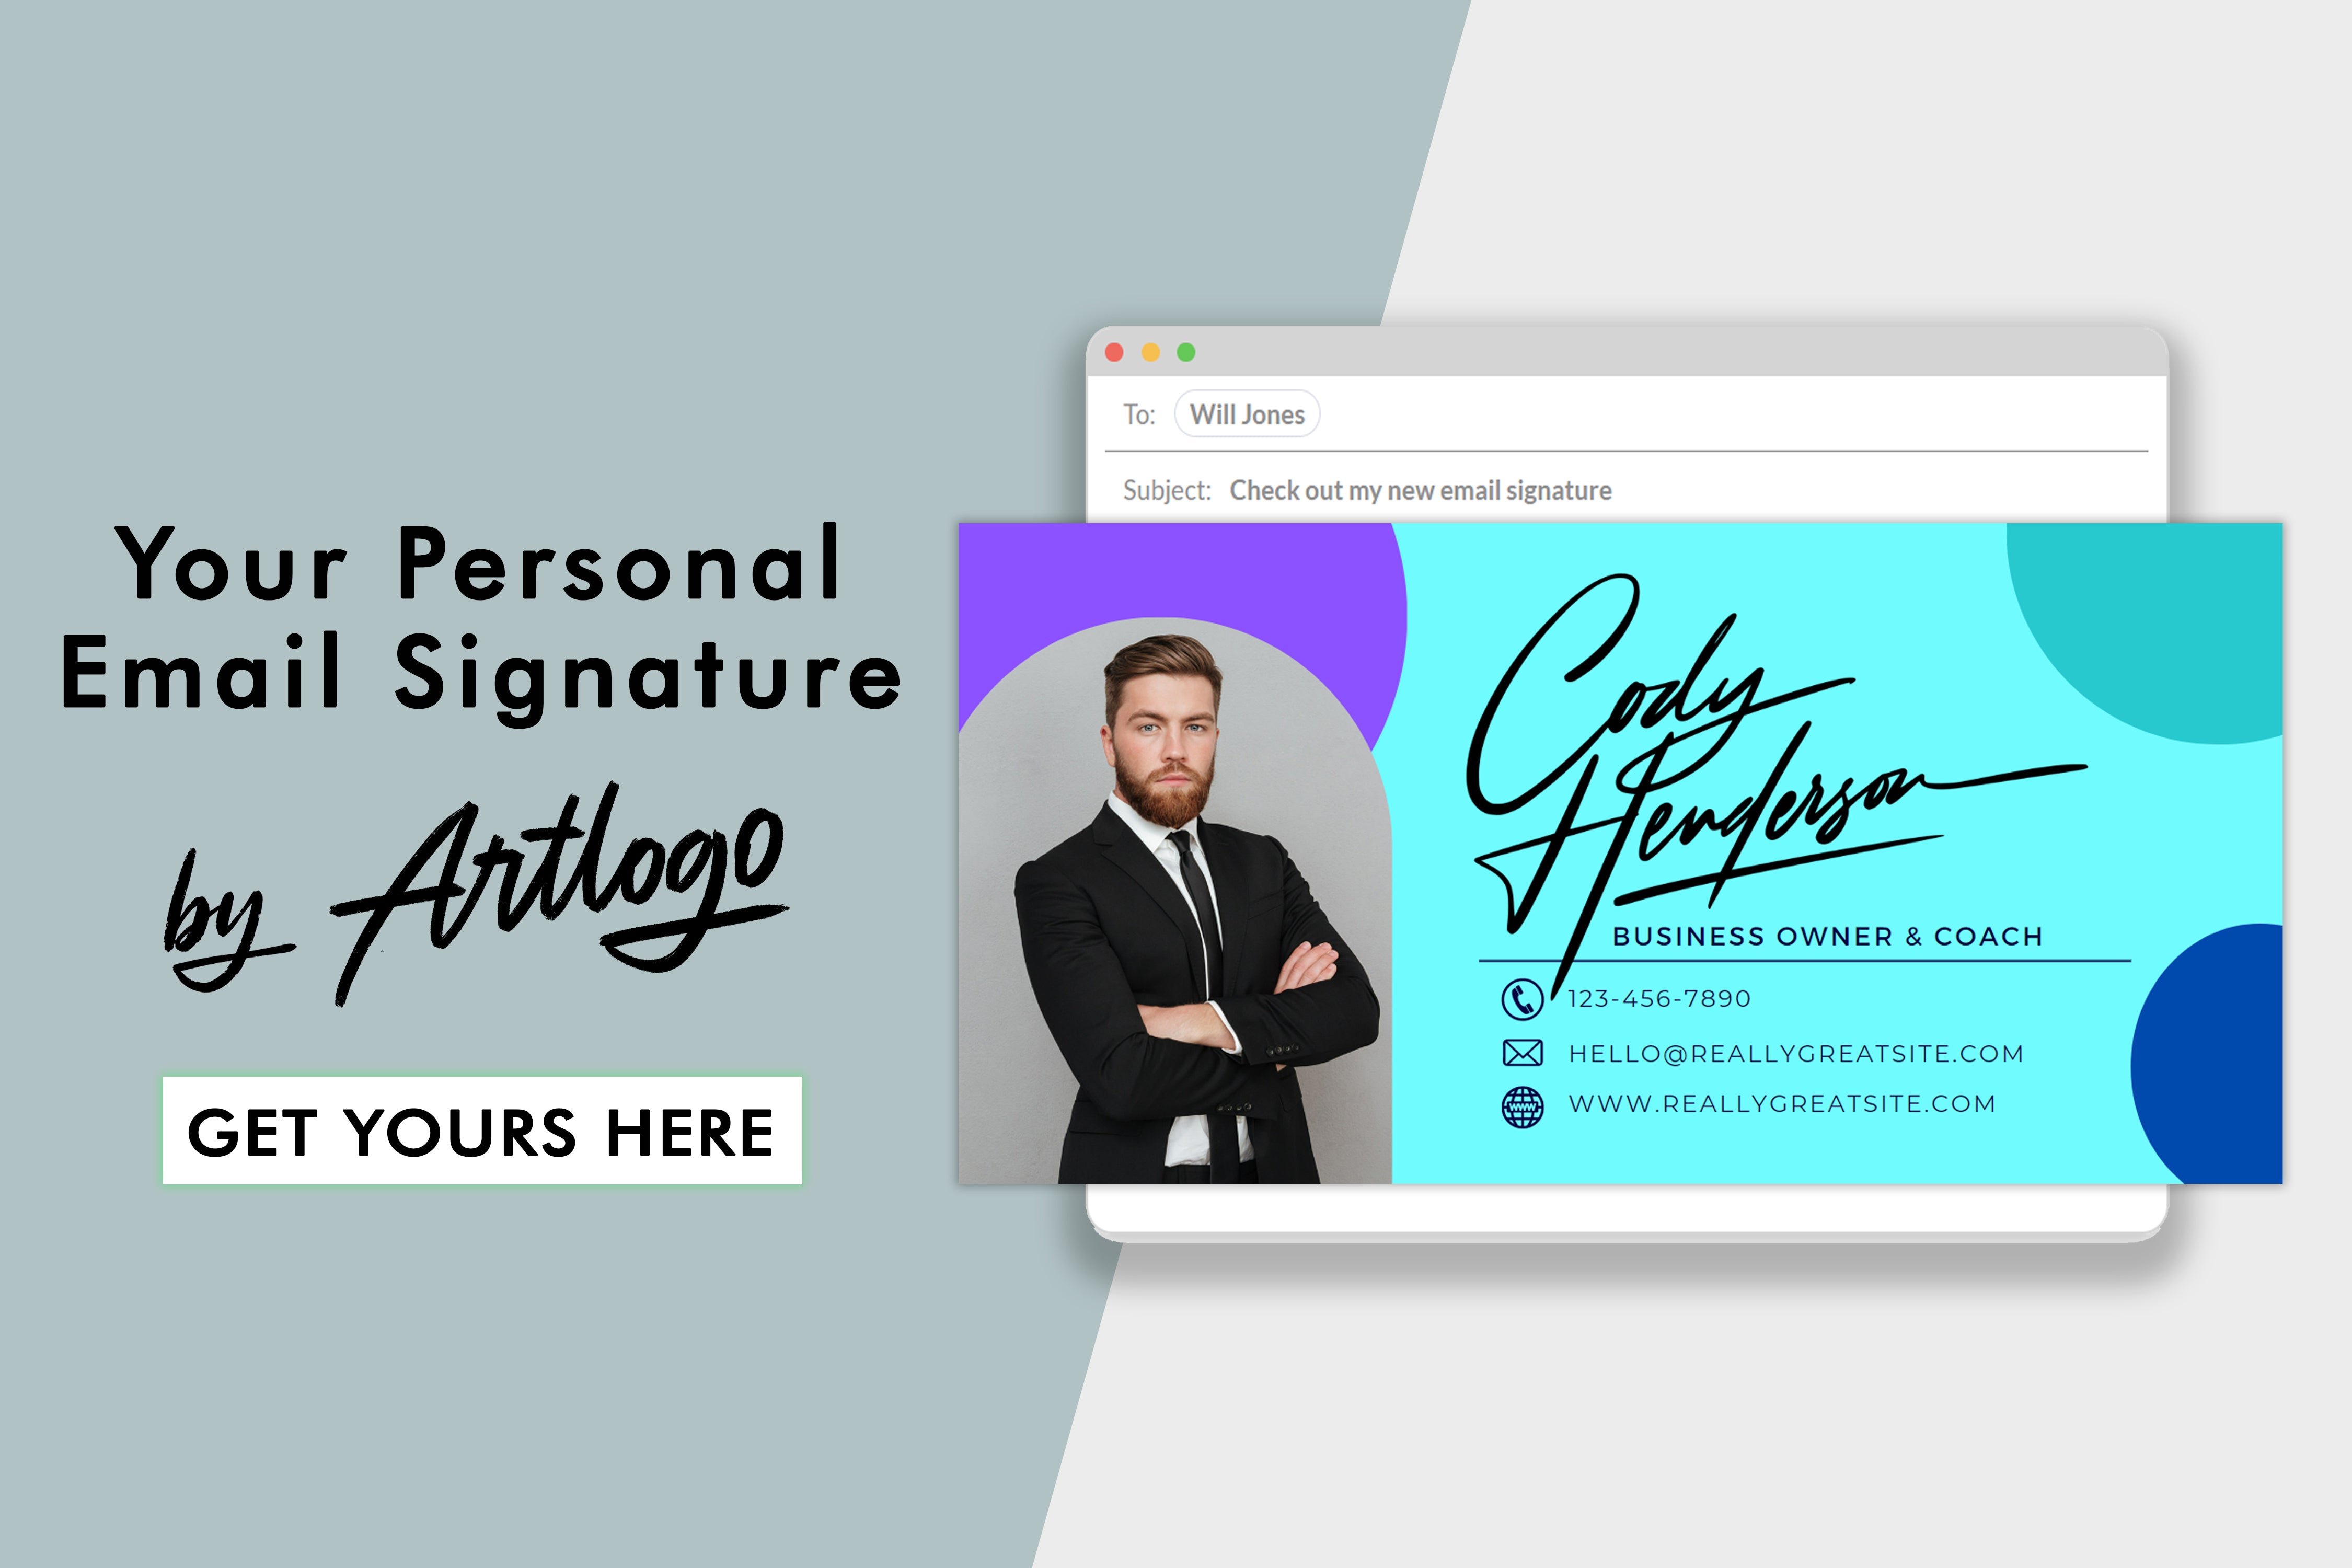 Master the art of crafting HTML email signatures with this step-by-step guide. Create professional and personalized signatures effortlessly.